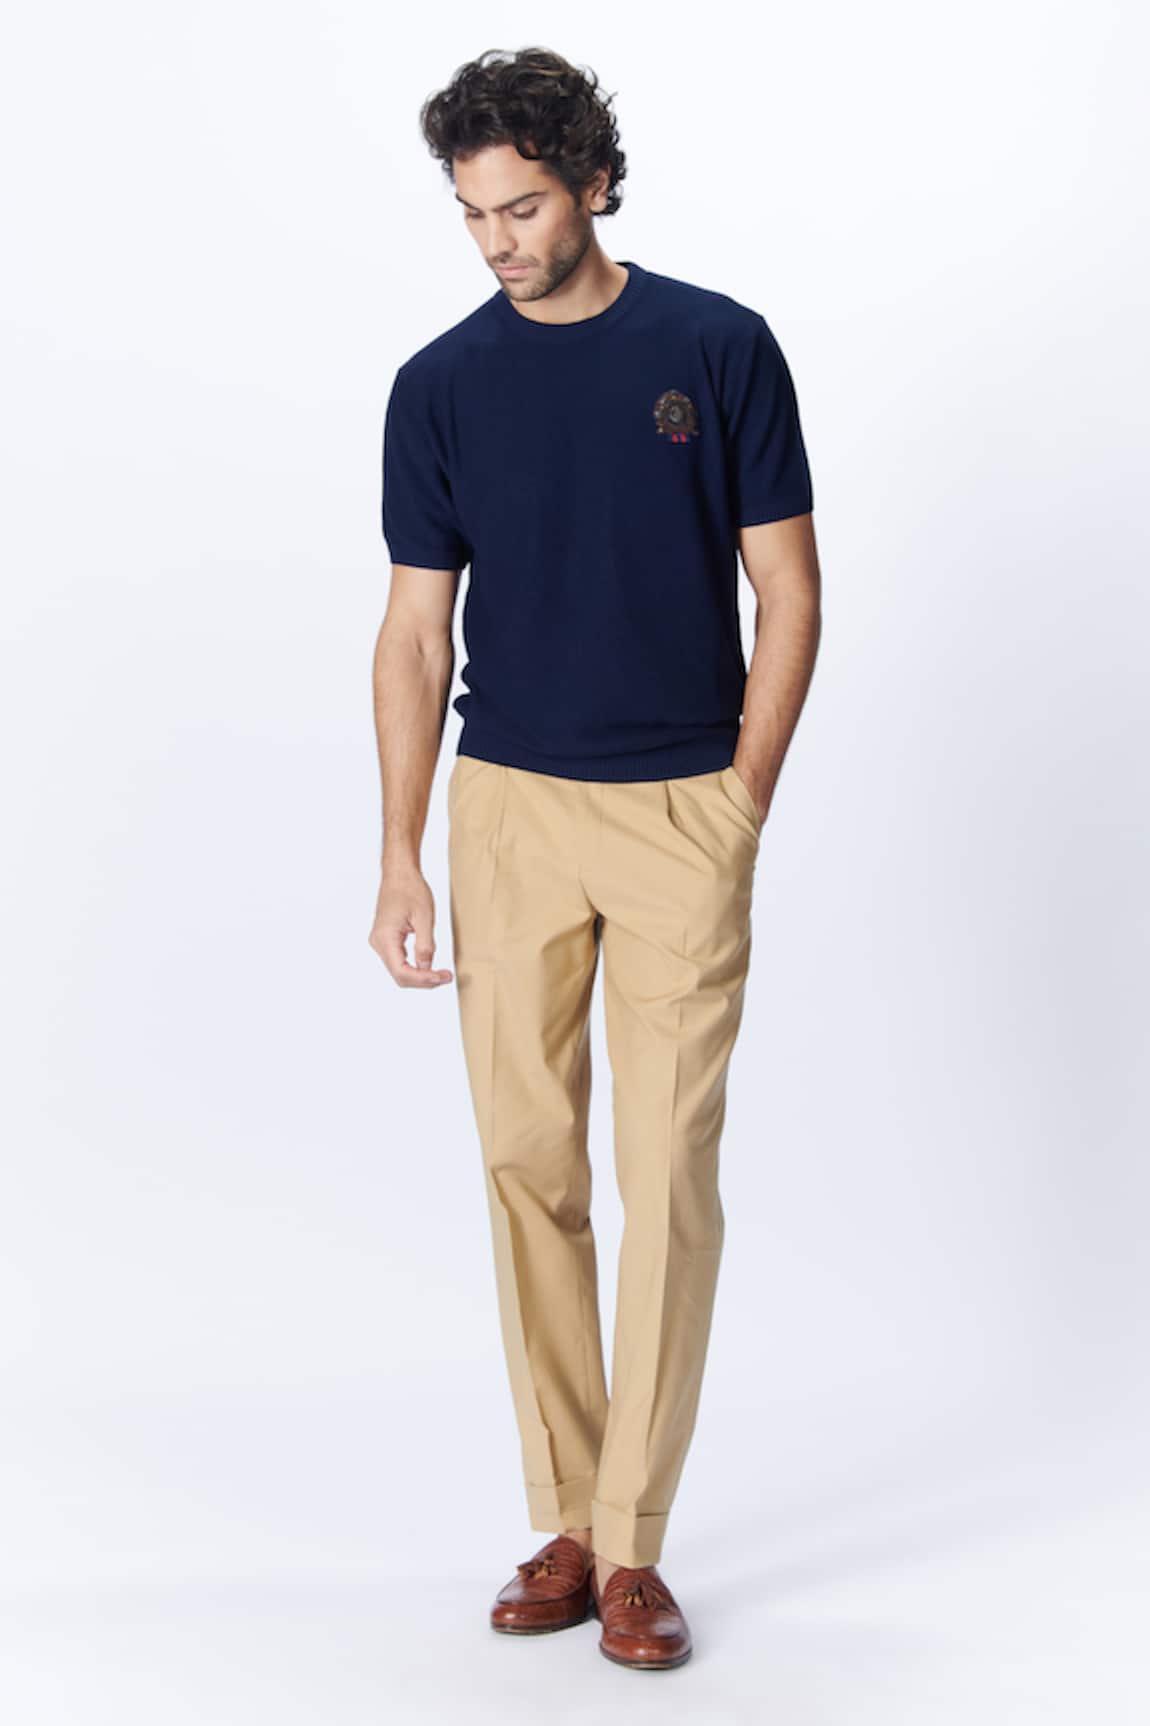 S&N by Shantnu Nikhil Crest Placement Embroidered T Shirt